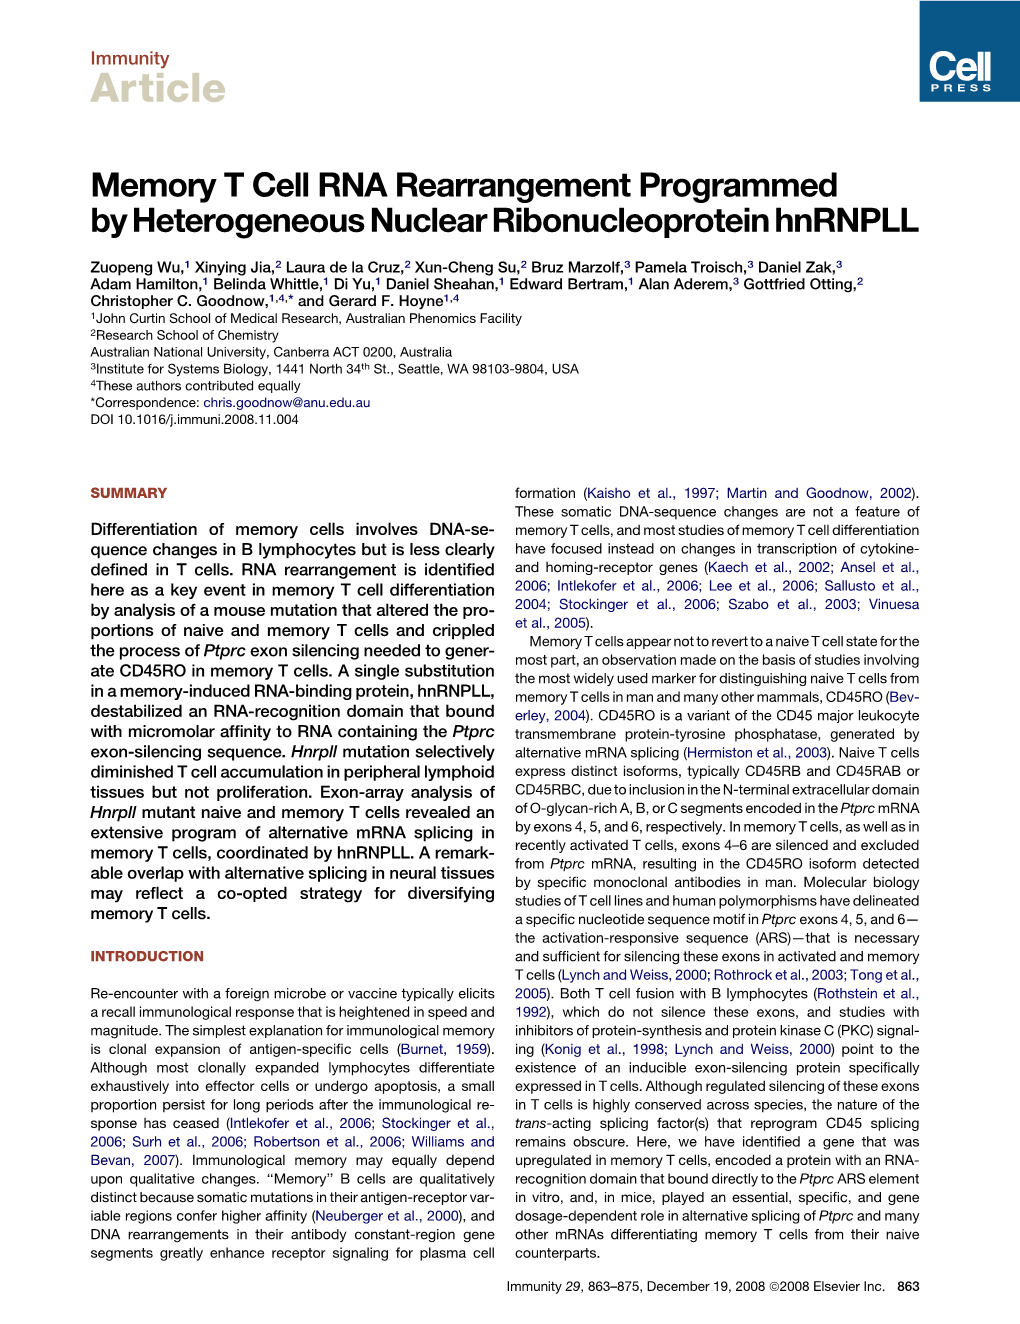 Memory T Cell RNA Rearrangement Programmed by Heterogeneous Nuclear Ribonucleoprotein Hnrnpll